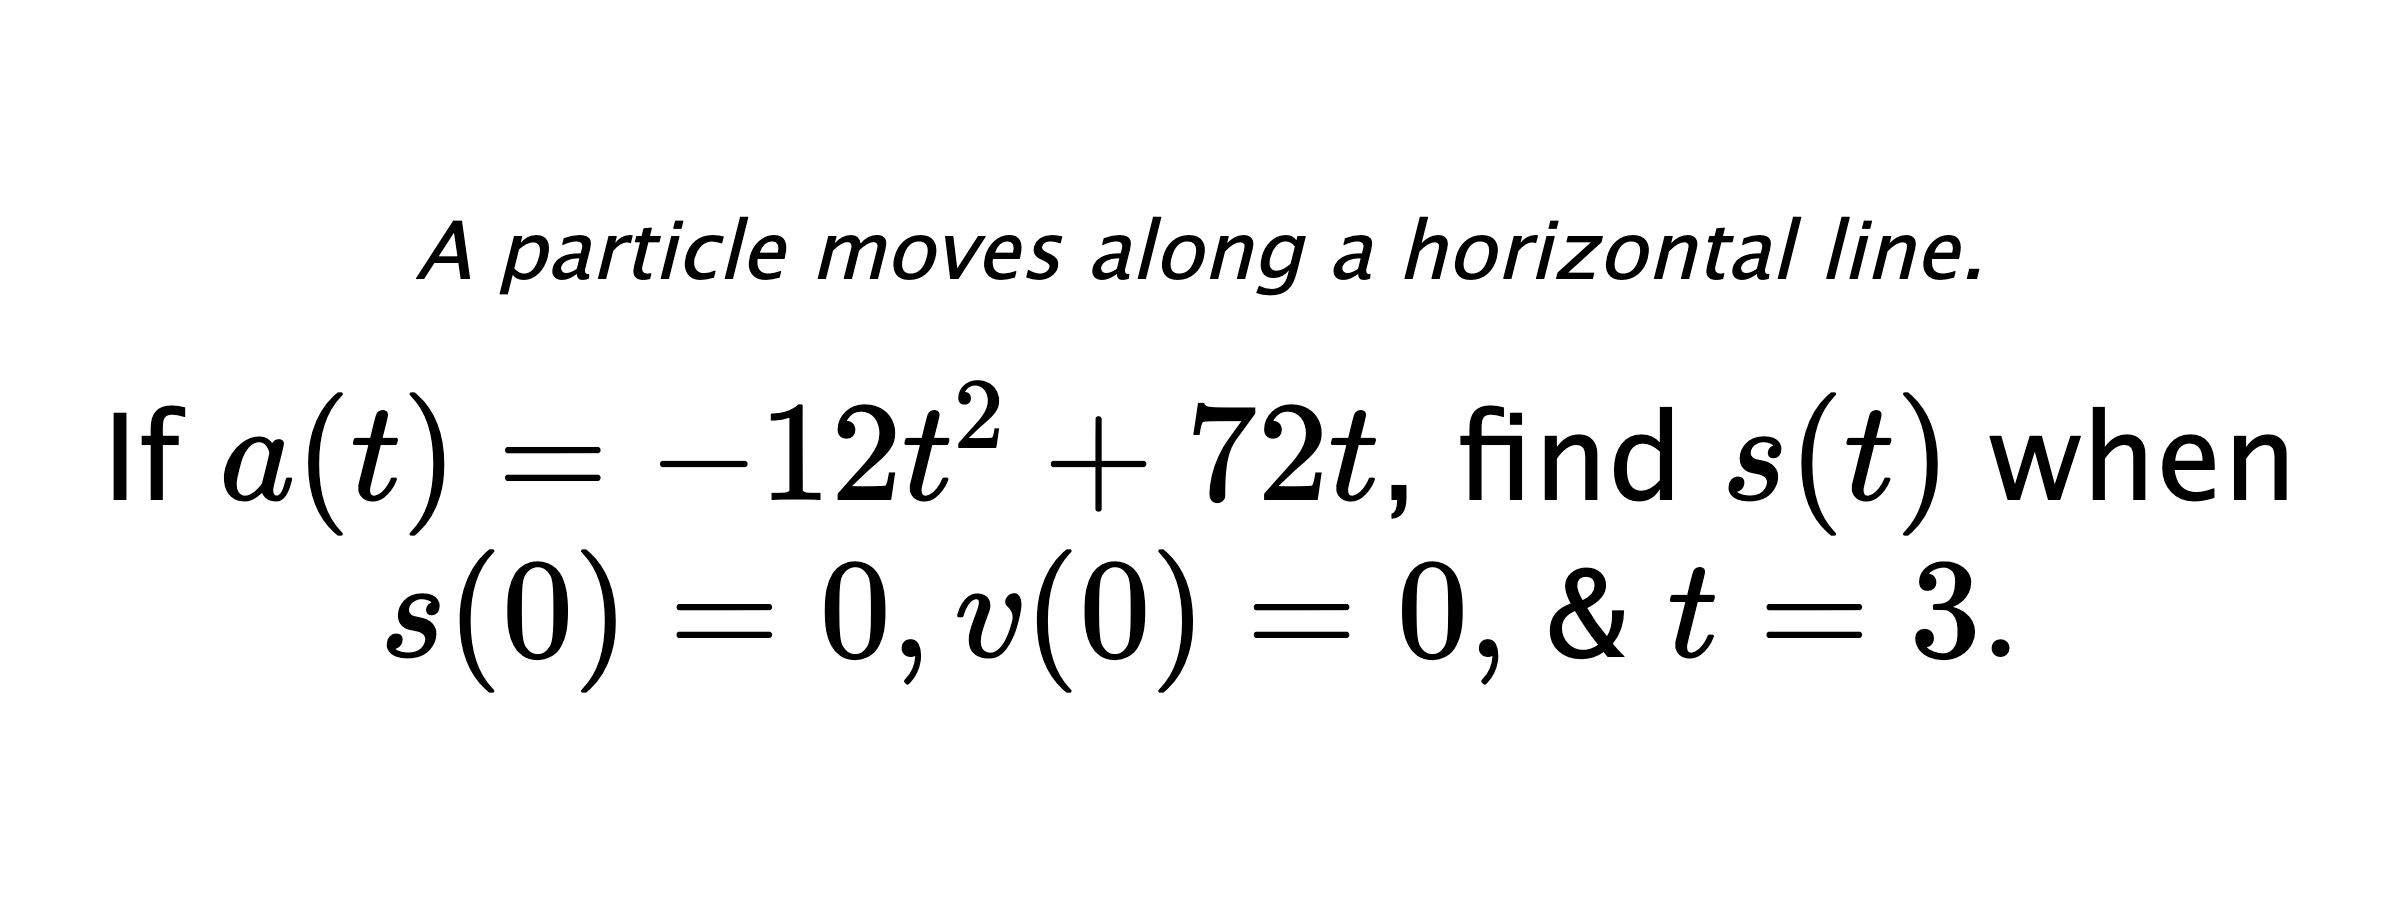 A particle moves along a horizontal line. If $ a(t)=-12t^2+72t $, find $ s(t) $ when $ s(0)=0, v(0)=0, $ & $ t=3 .$